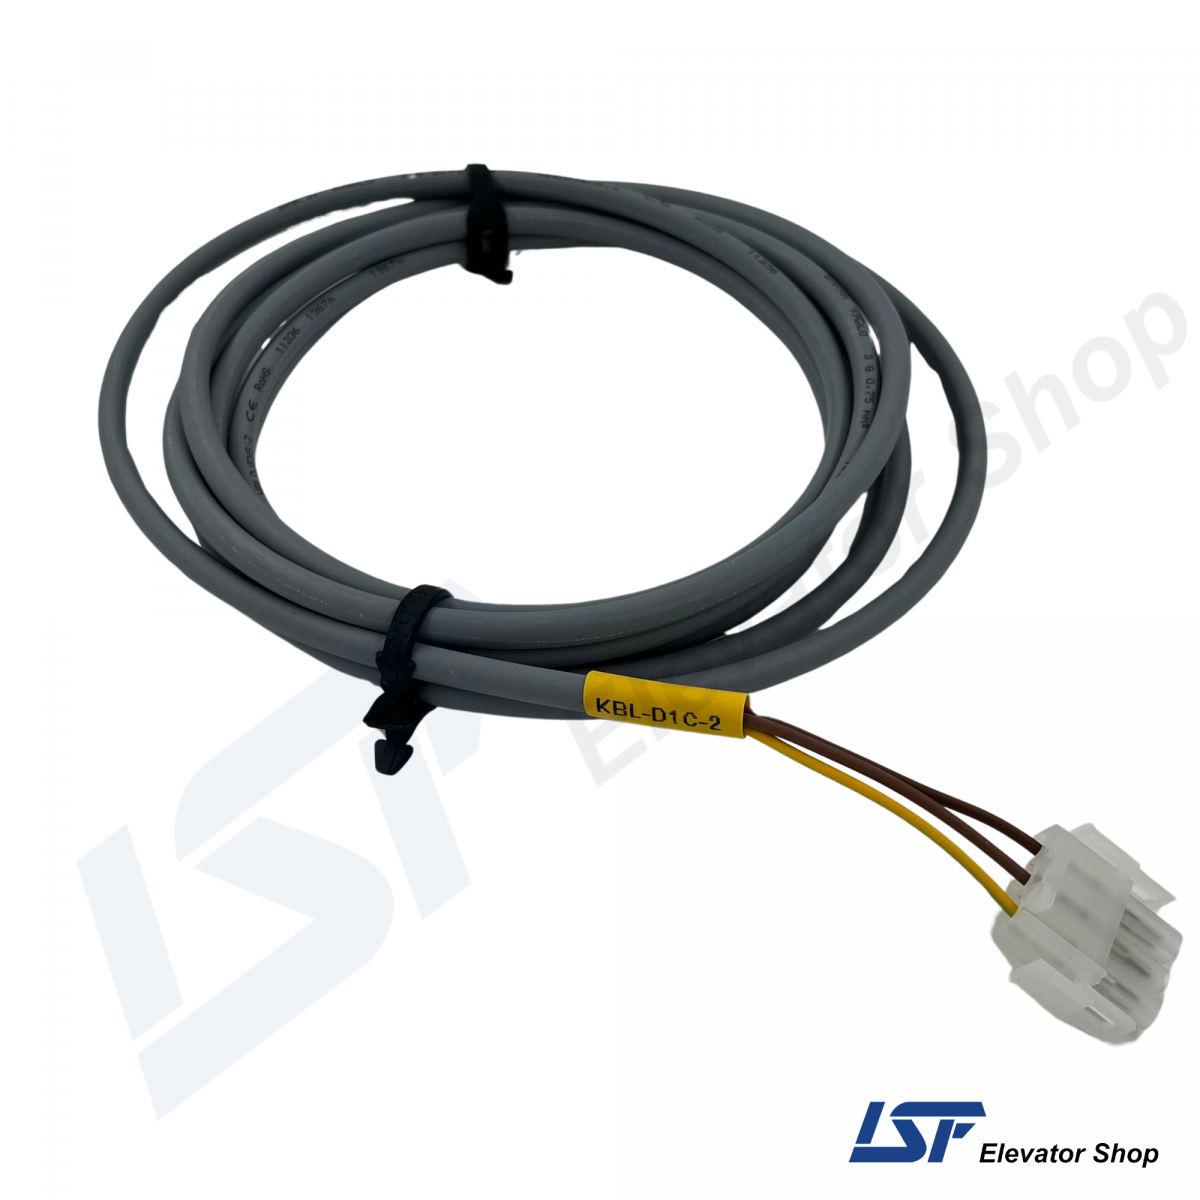 KBL-D1C-2 Arkel Door Contacts Cable 3m. for Elevator Systems (3)